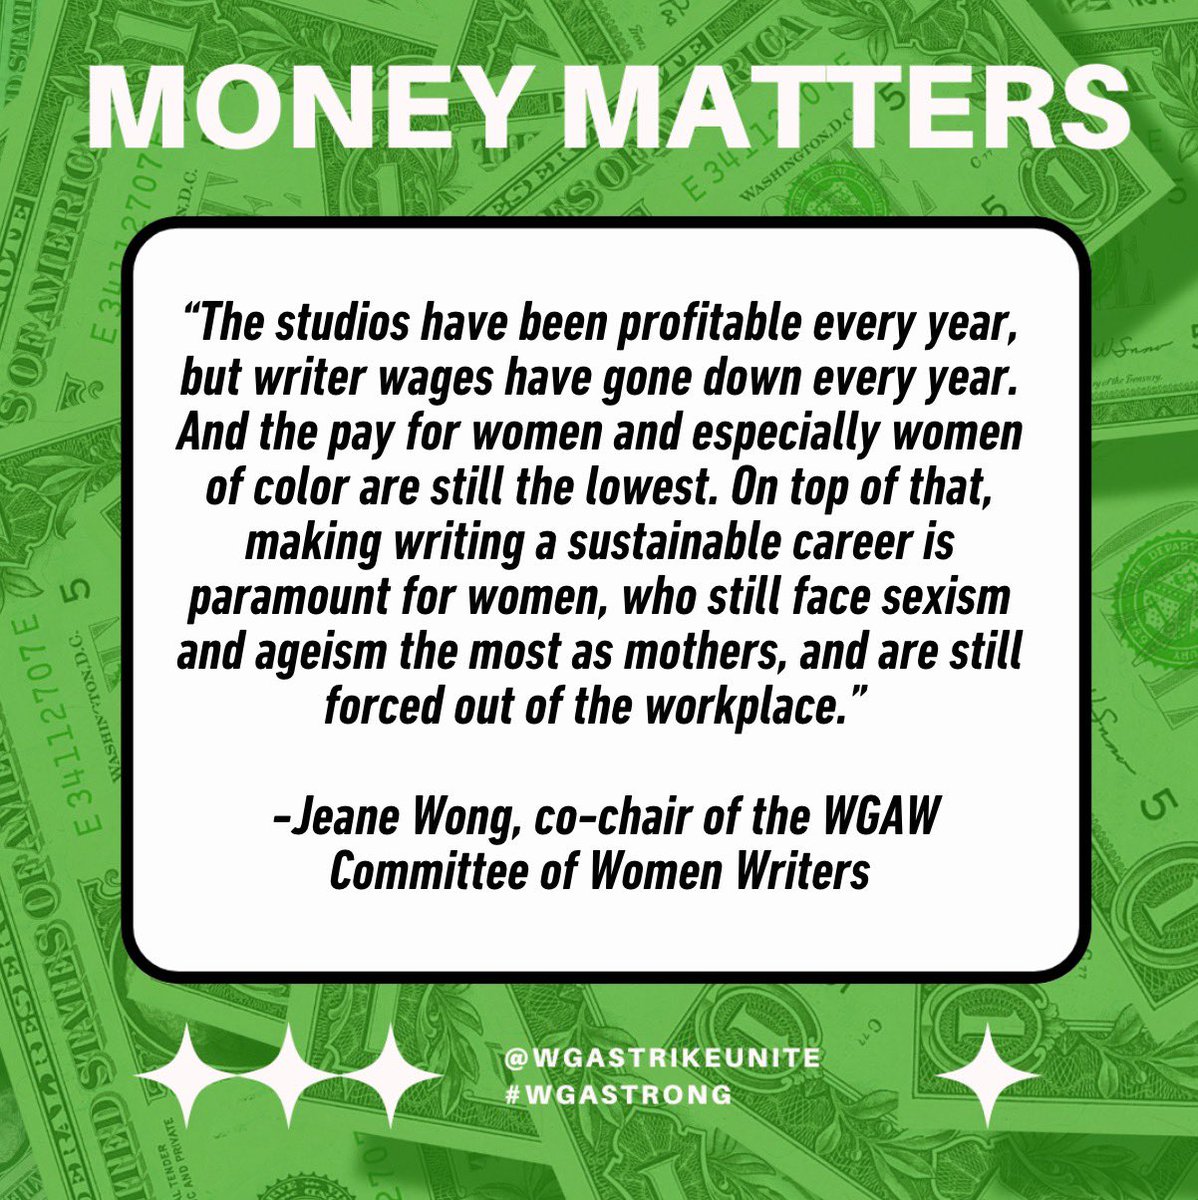 On #WomensEqualityDay, @jeanedevivre reminds how much womxn have at stake in this fight. The #WGAStrike not only a fight for fair pay & better worker protections for all, but an essential battle in the fight against gender & racial inequality in our profession too. #WGAStrong